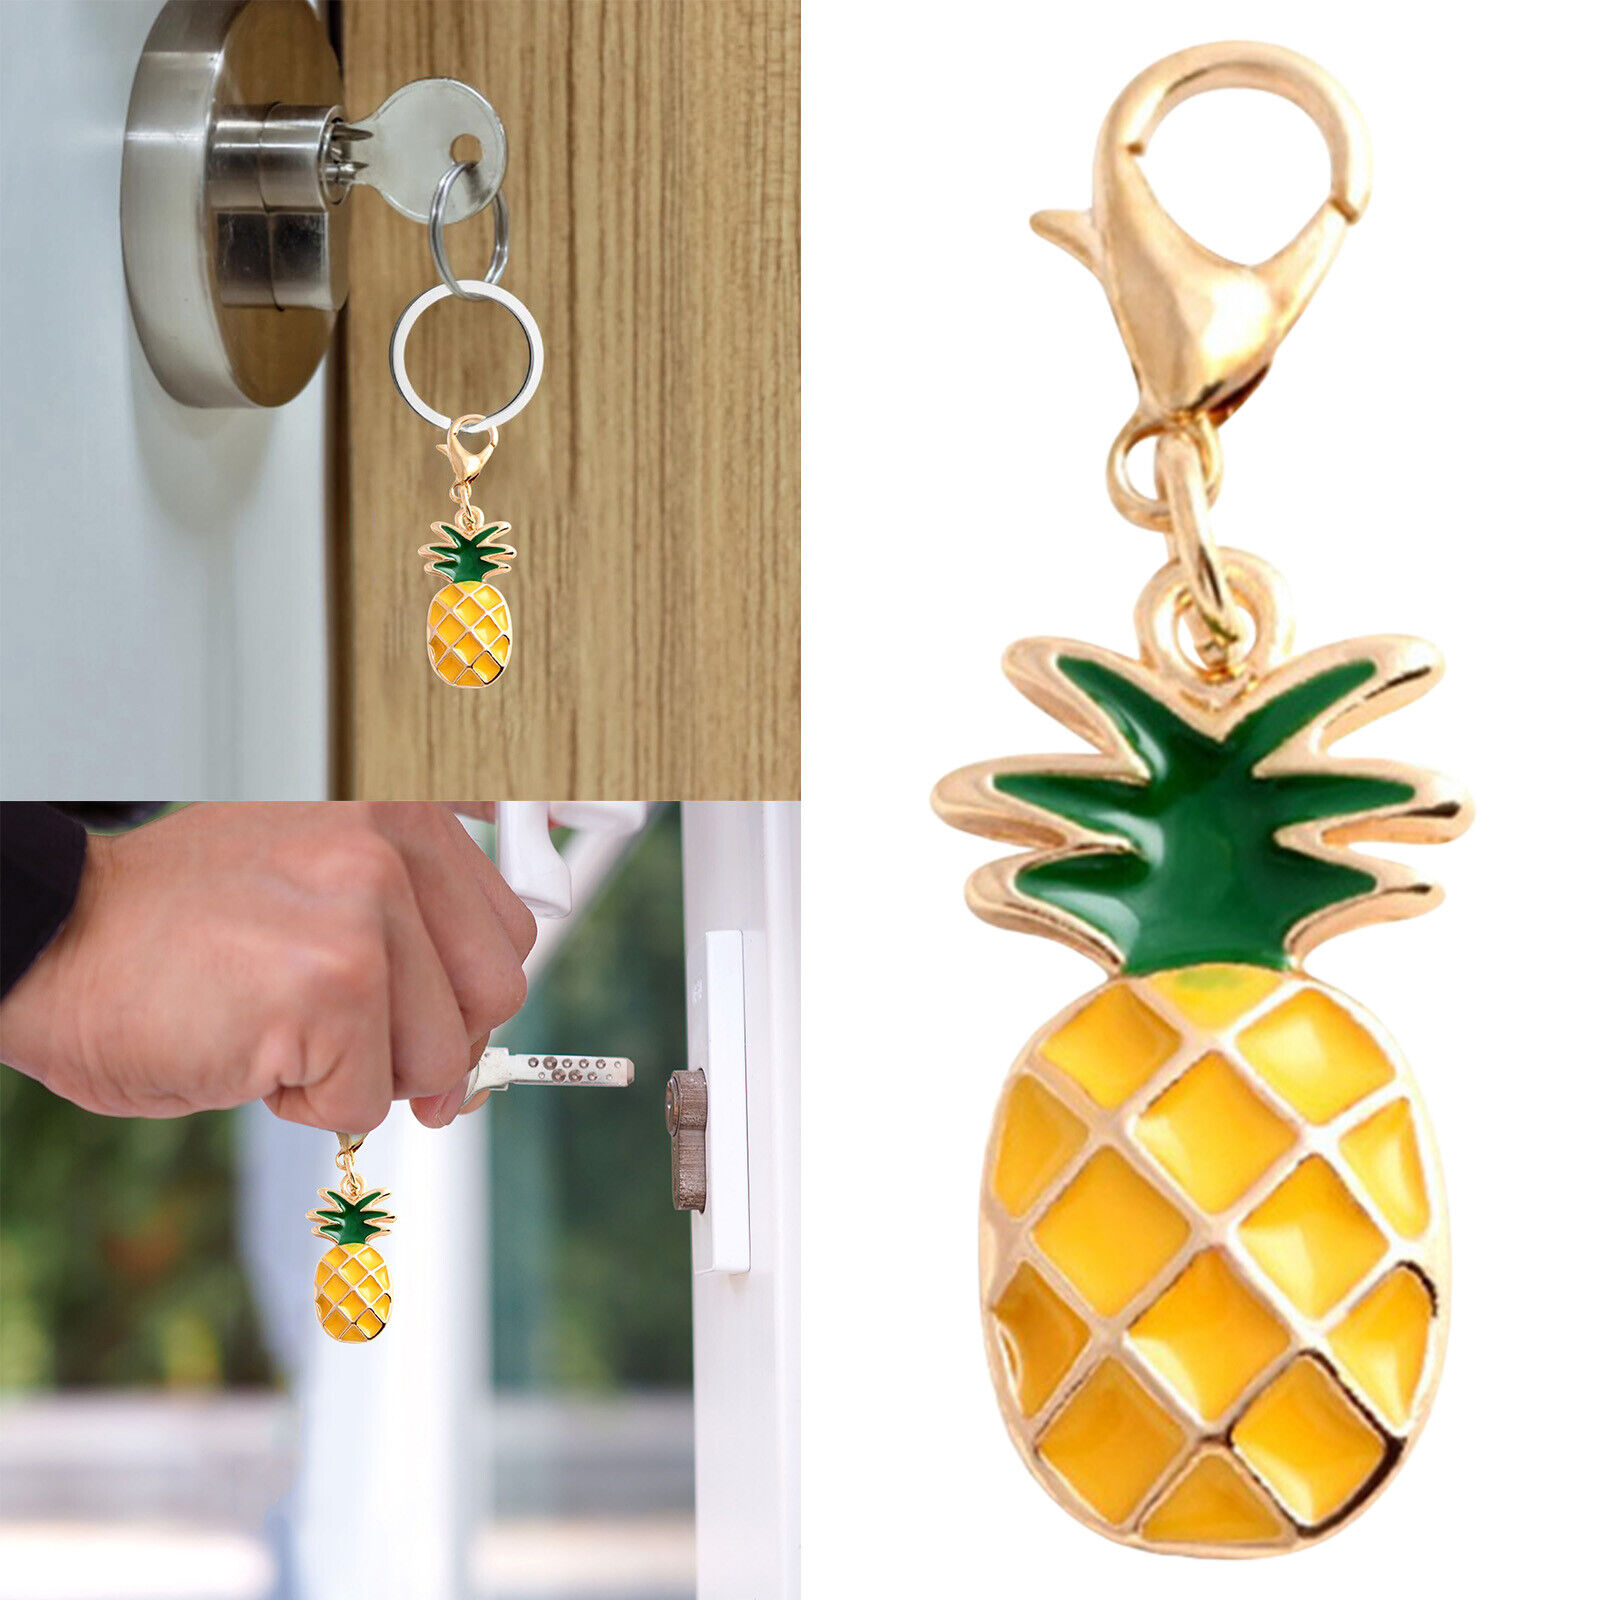 Keychain Alloy Pendant Fruit Pineapple Small Pendant Fashion Small Gifts